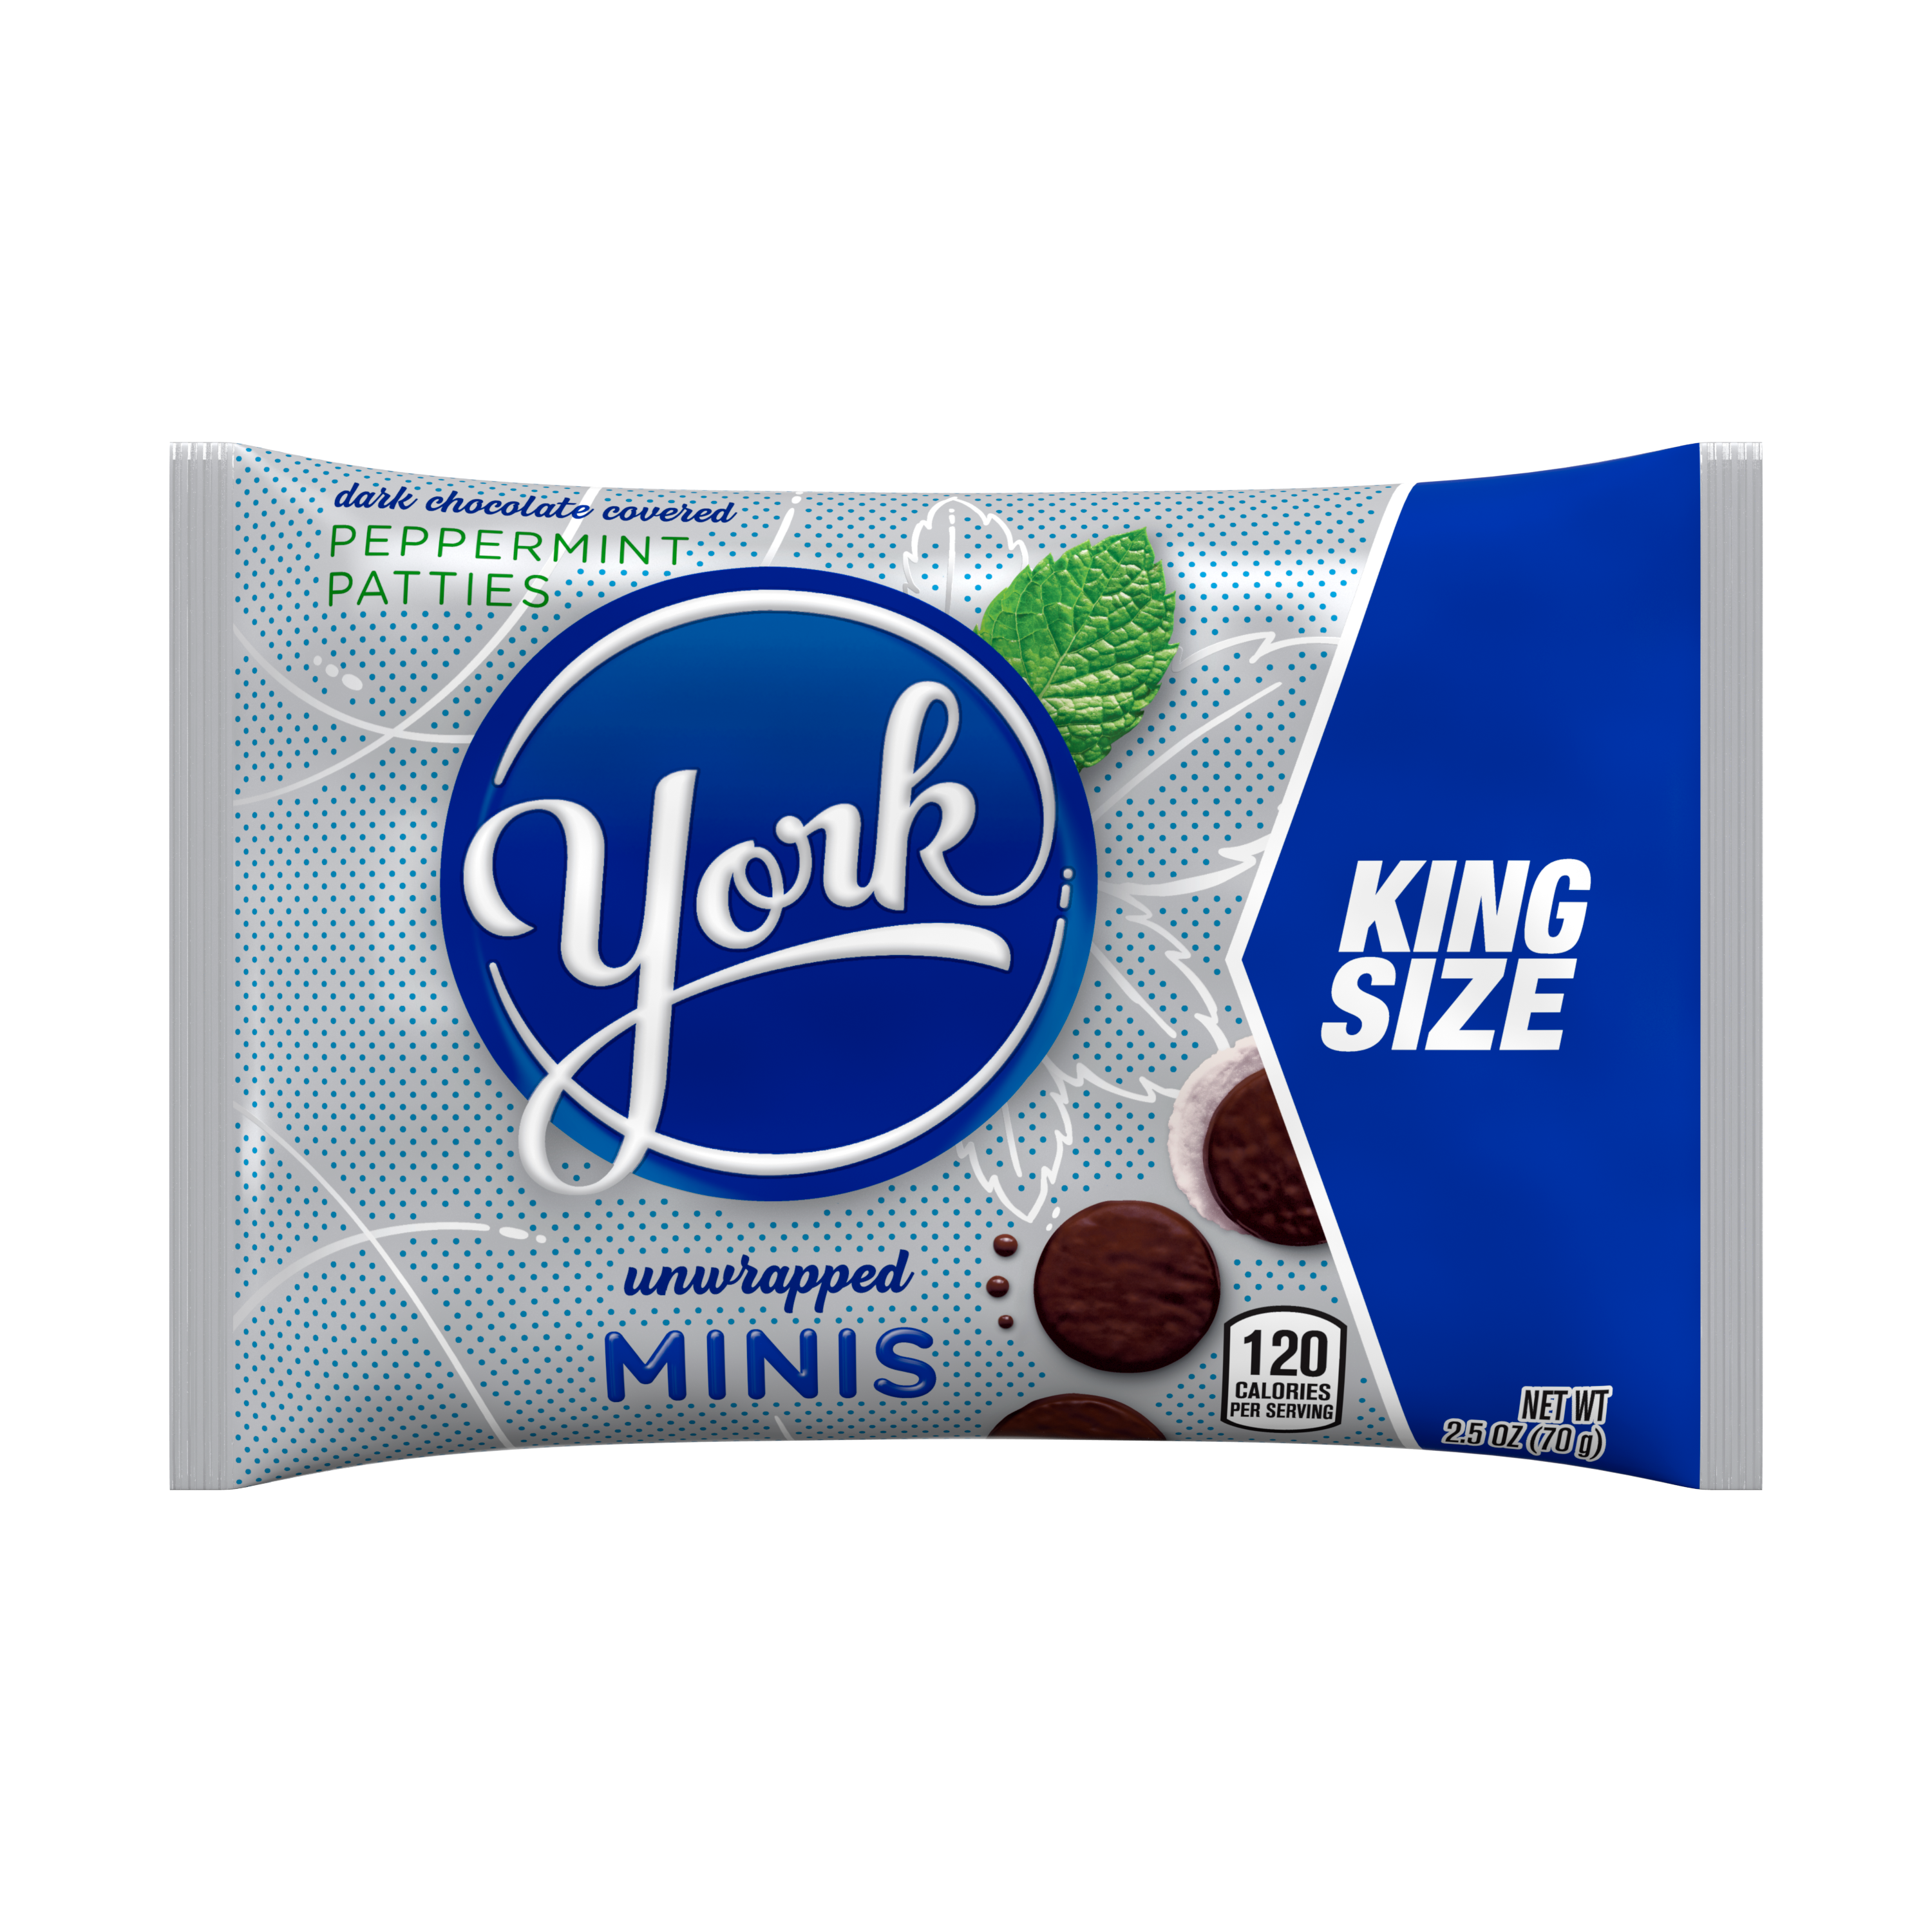 YORK Minis Dark Chocolate King Size Peppermint Patties, 2.5 oz bag - Front of Package